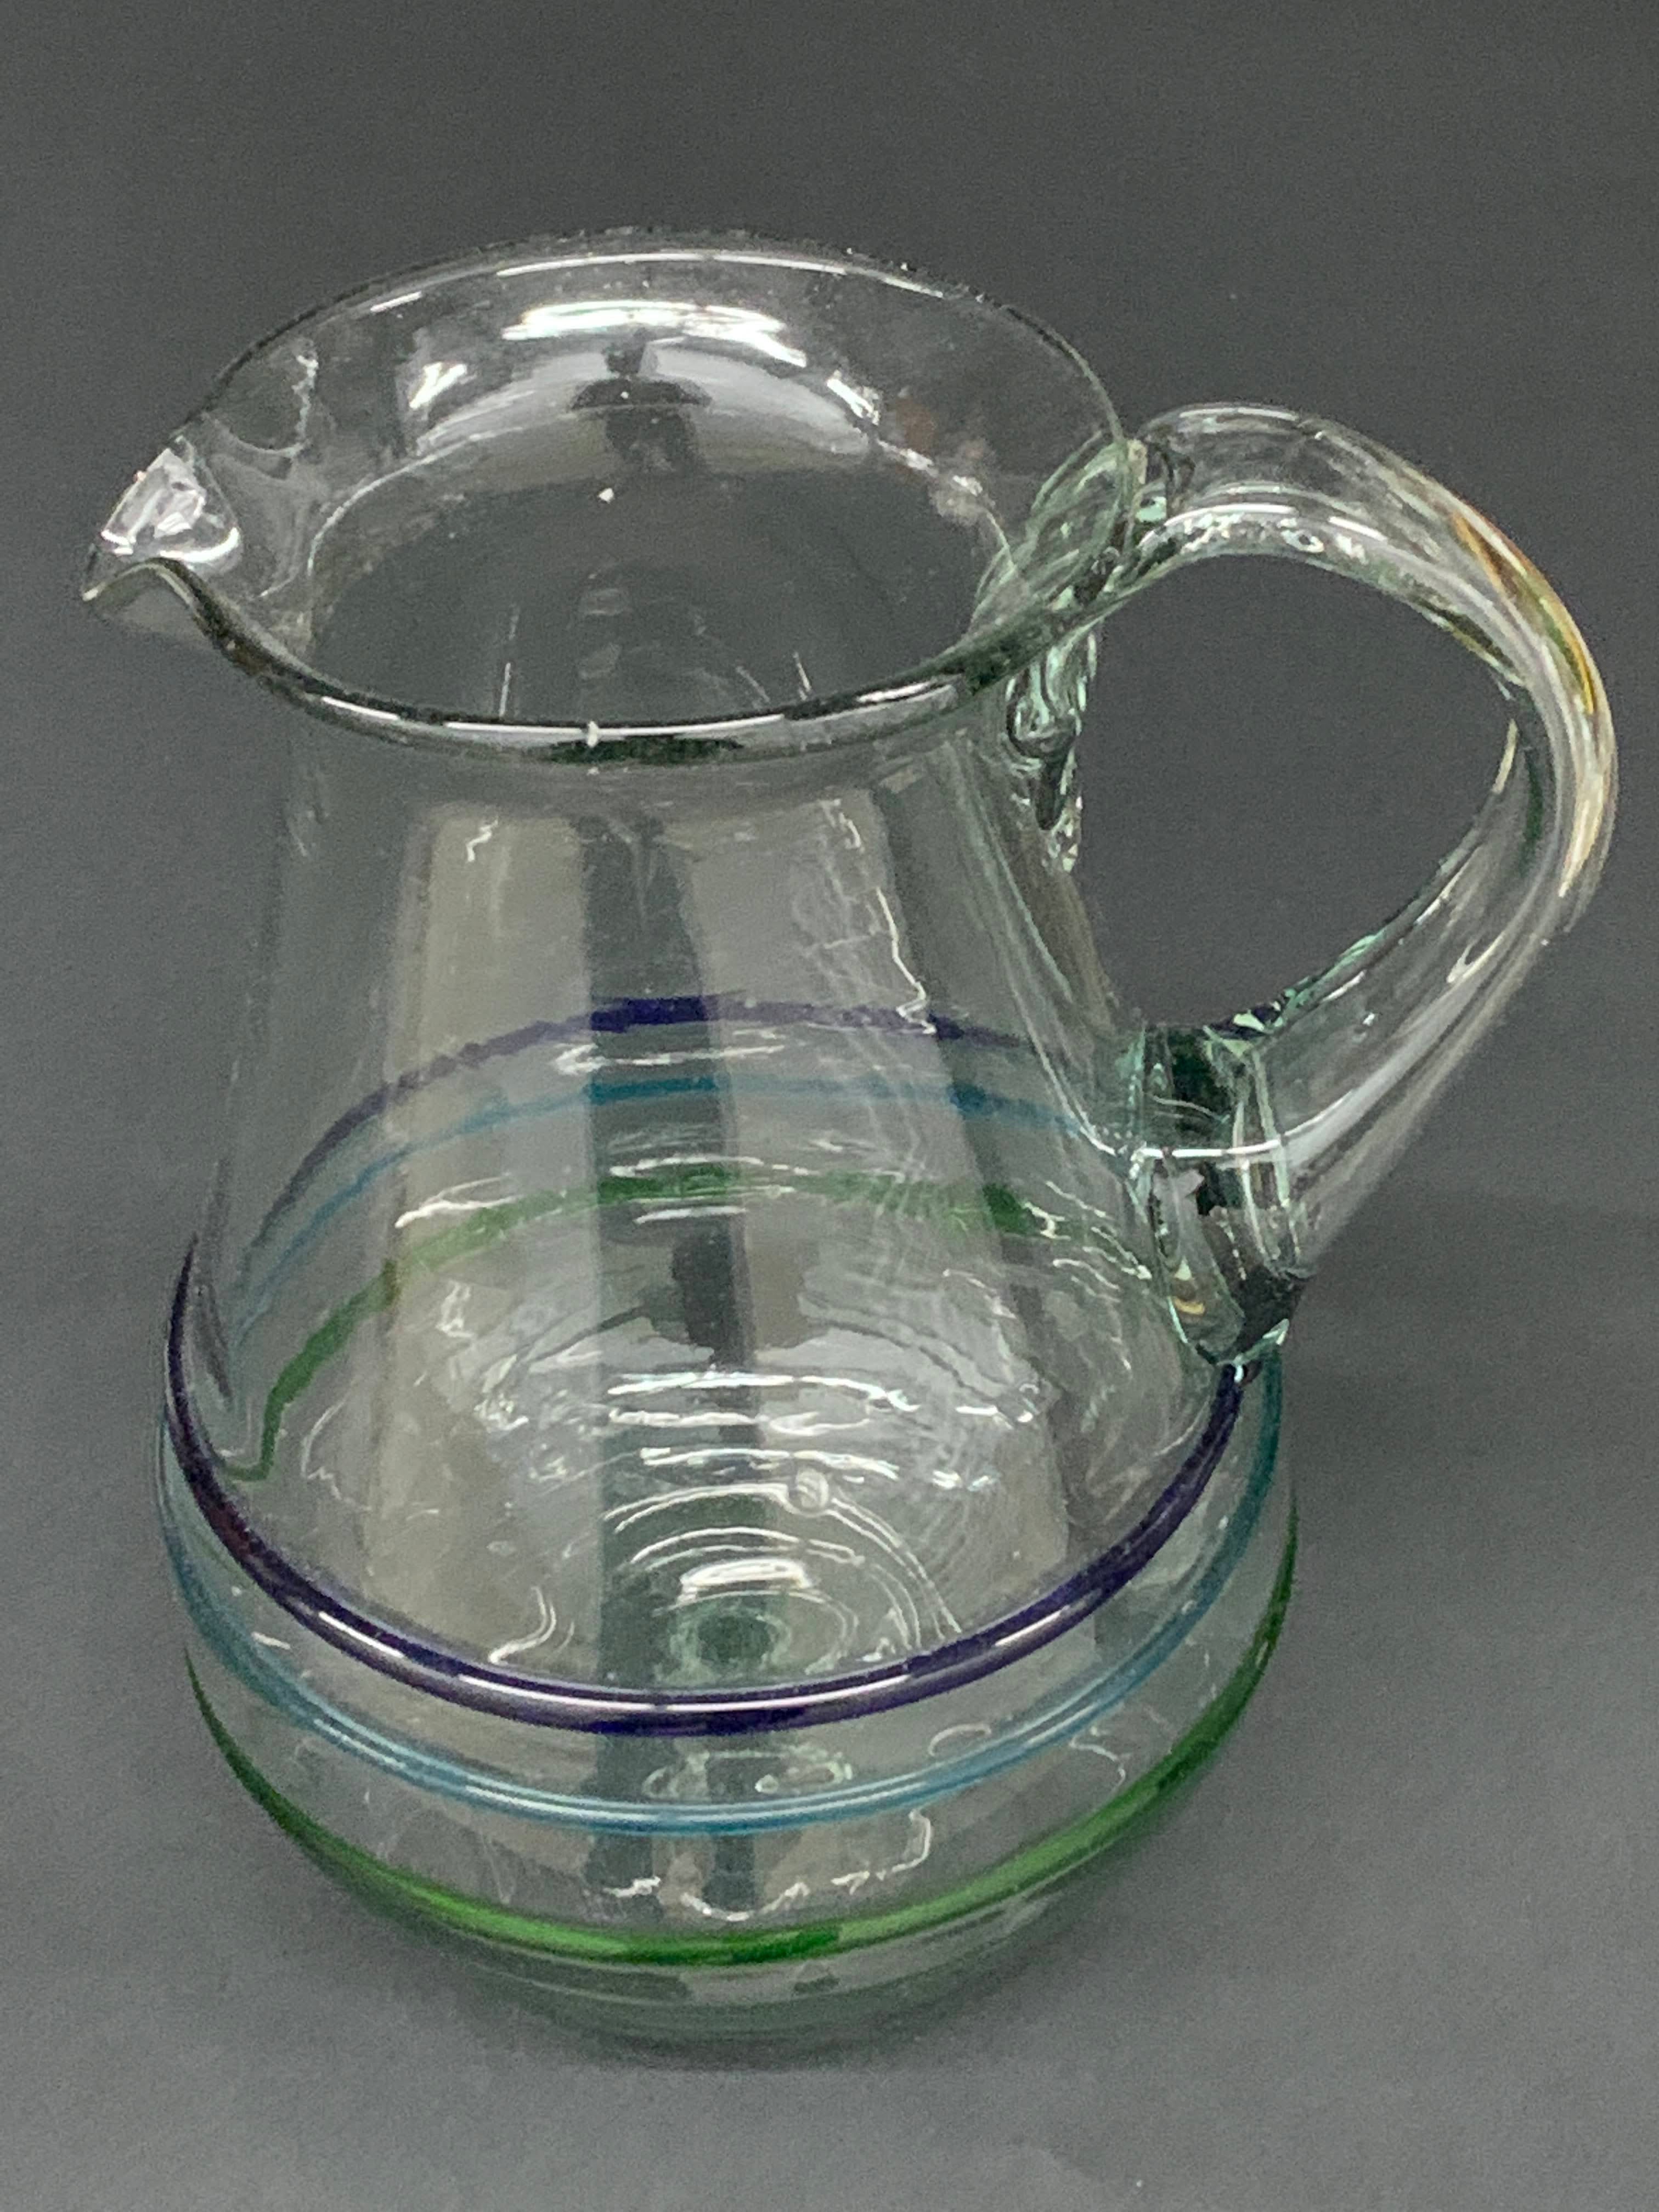 Blue Tint Bubbled pattern - Imported Glass Pitcher